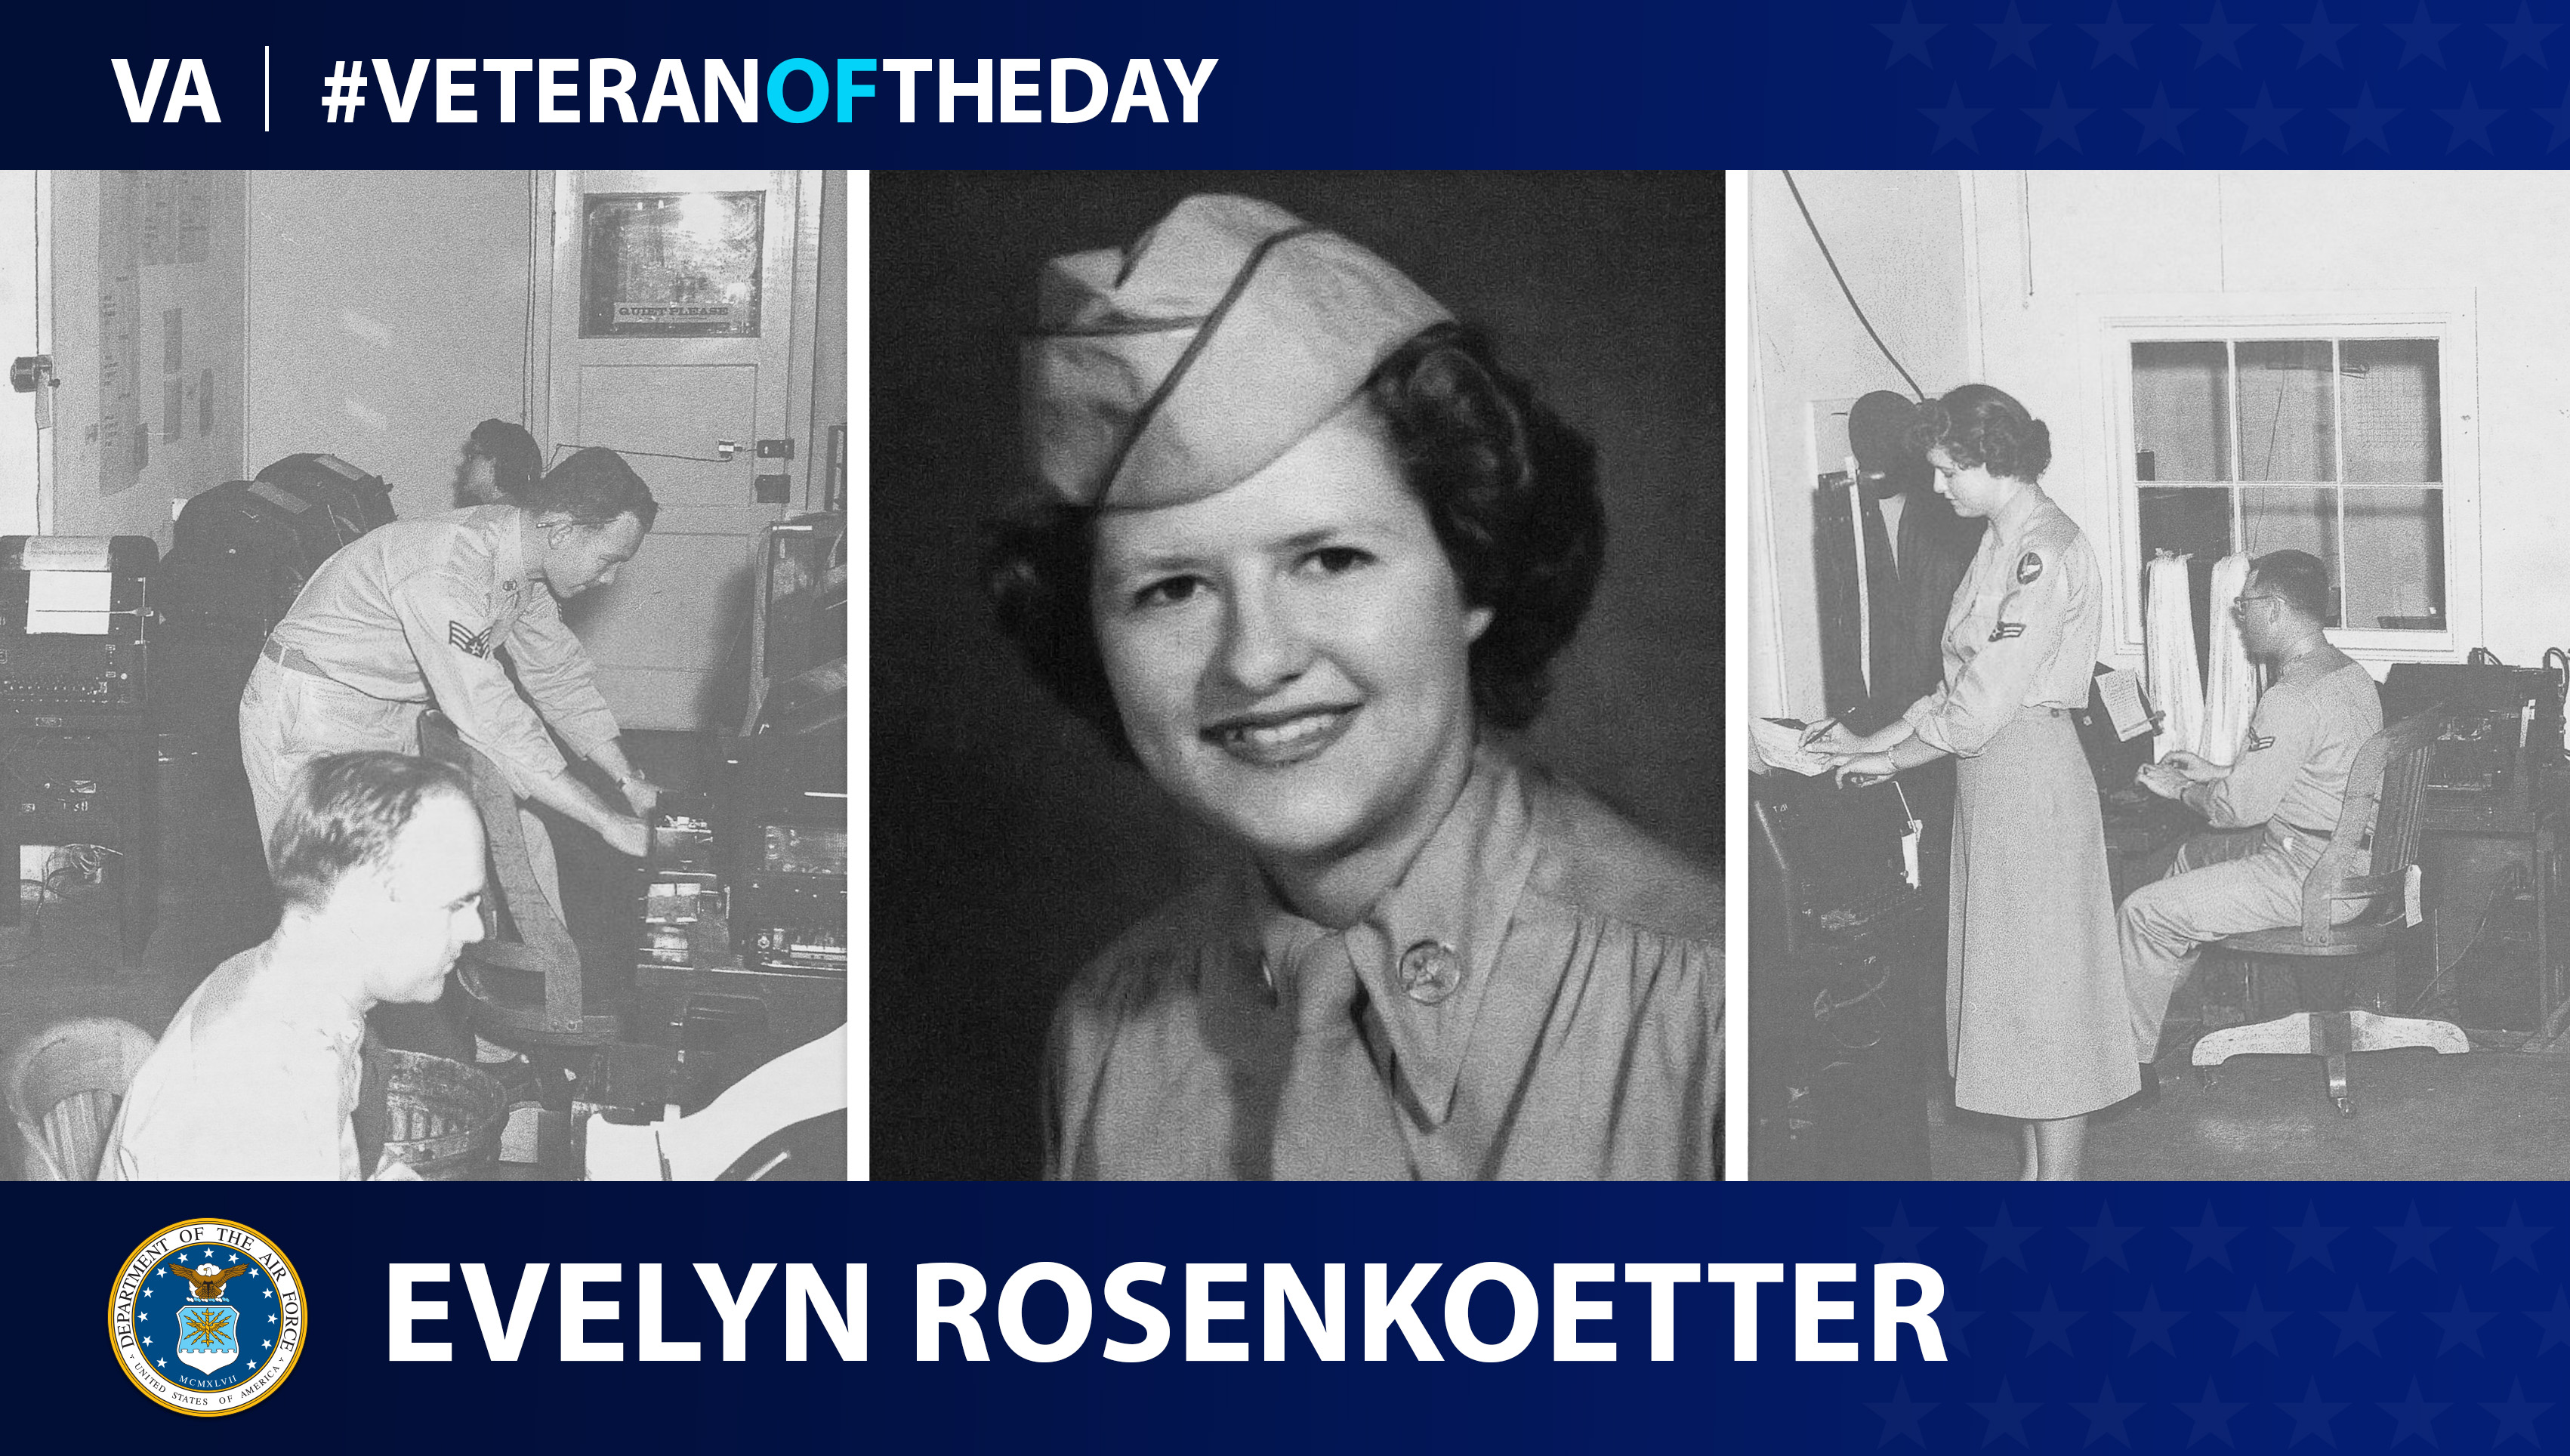 Air Force Veteran Evelyn Rosenkoetter is today's Veteran of the Day.